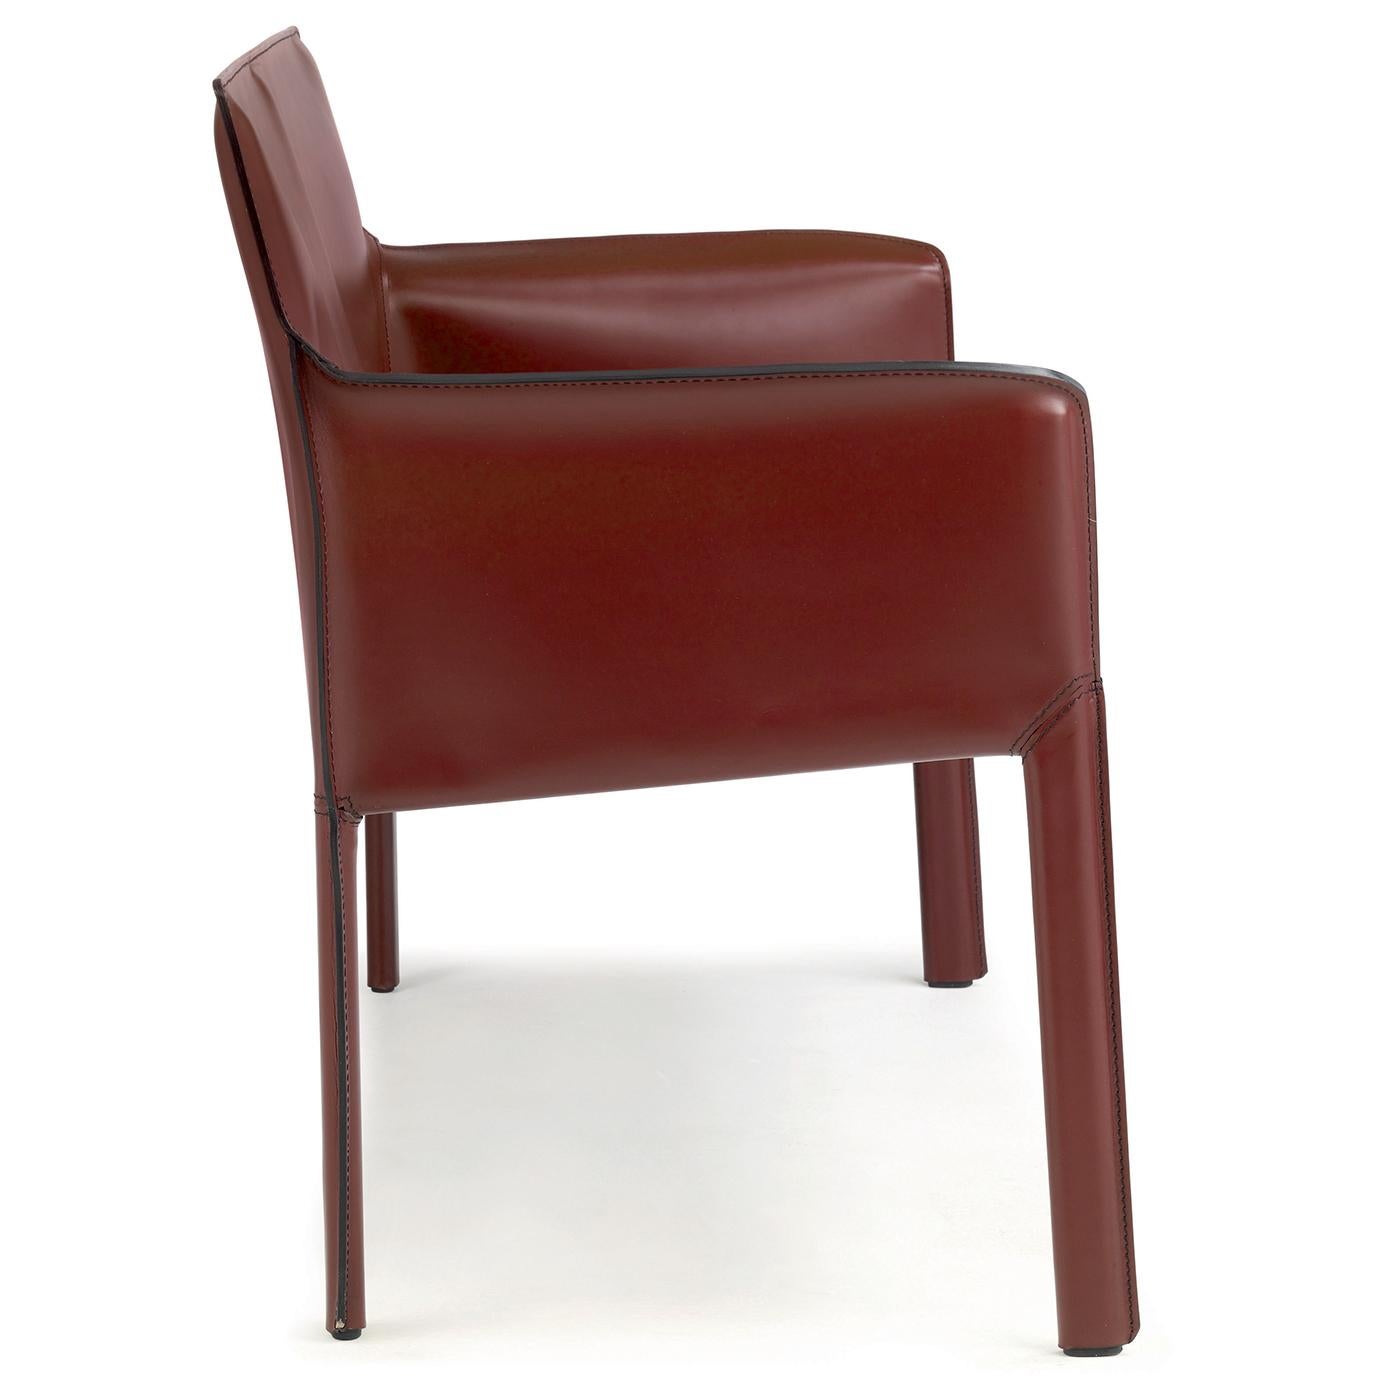 This extremely delicate, four-legged sofa has a barely-there silhouette that is sophisticated and stylish. Its tubular steel frame is covered in its entirety by Bordeaux-colored leather. It features a metal seat pan covered with black technical